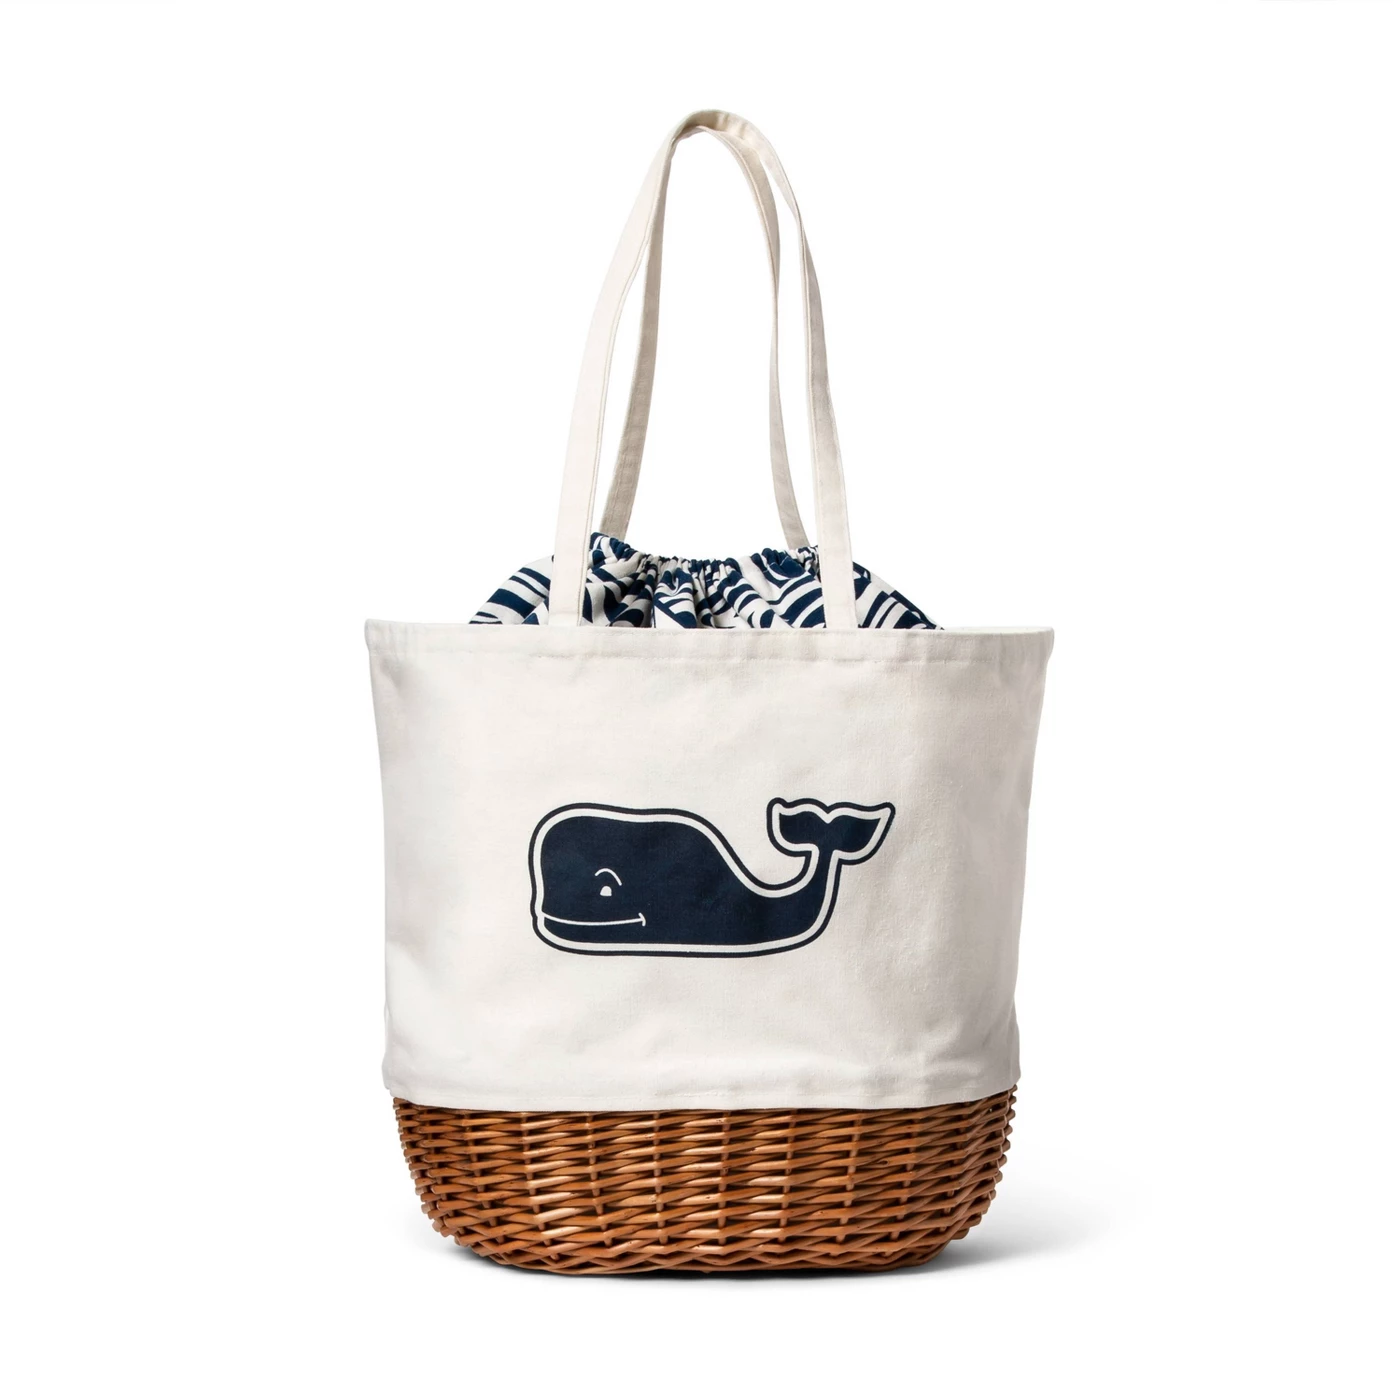 Whale Picnic Tote with Rough Seas Lining - Navy/White - vineyard vinesÂ® for Target - image 1 of 5